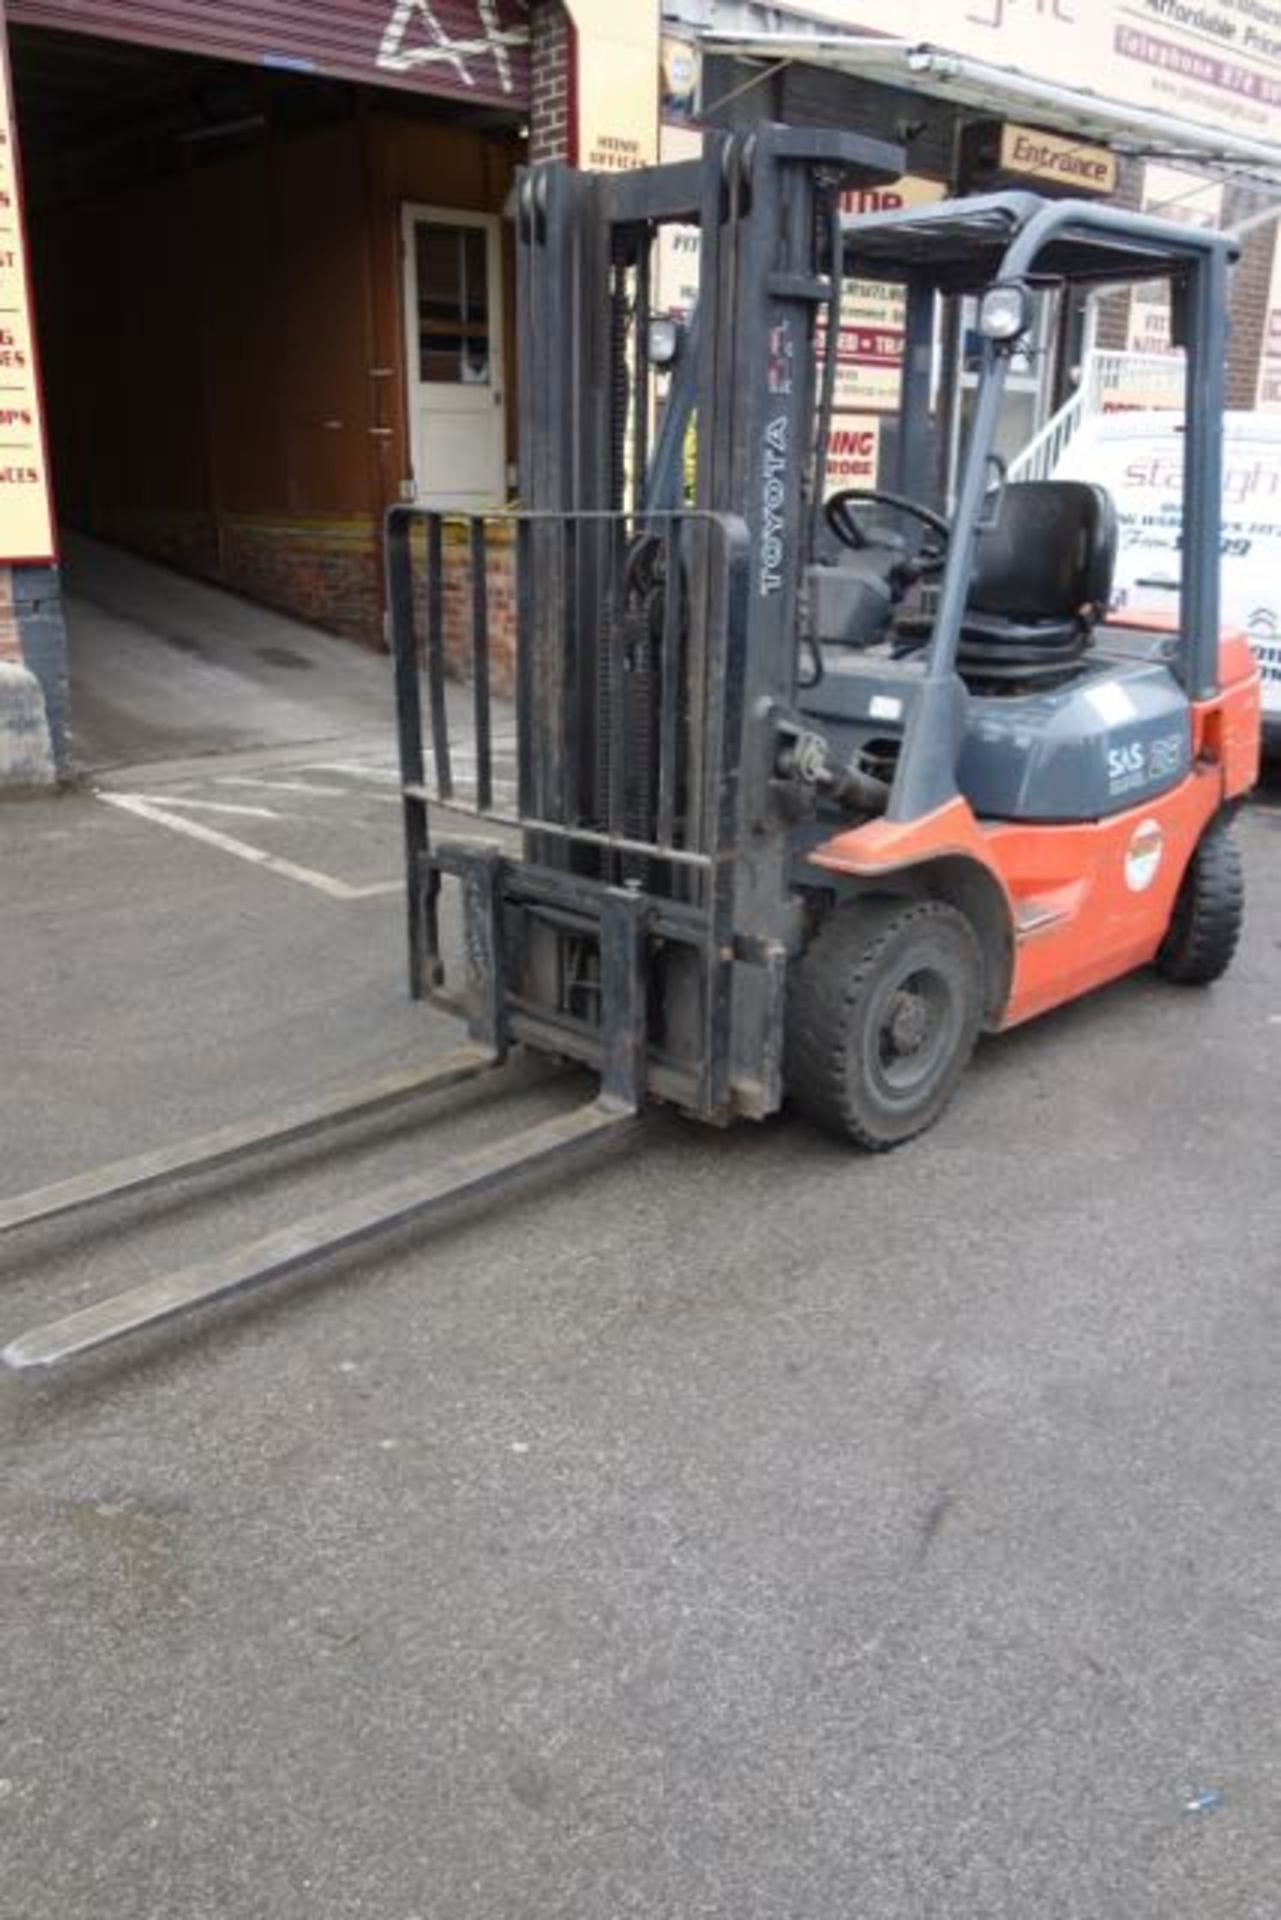 2003 Toyota 25 2.5 Tonne Diesel Forklift Truck. Max lift height. 4.1m. Side Shift. Full Working - Image 4 of 8